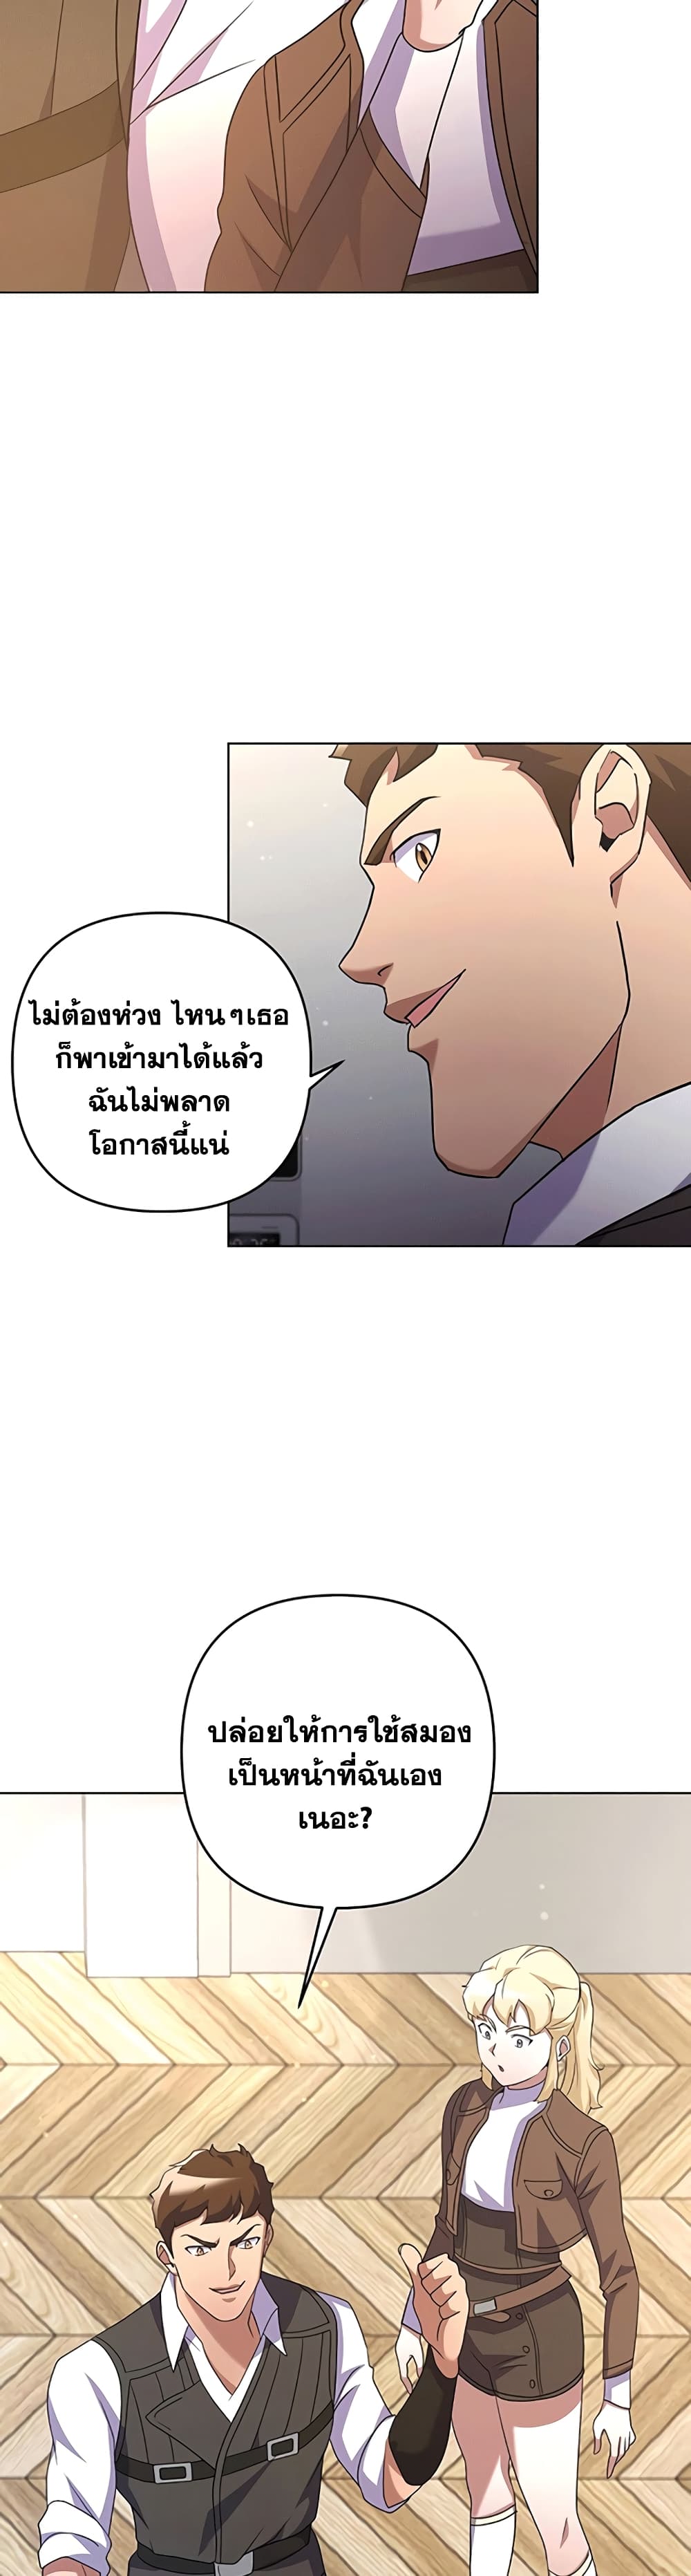 Surviving in an Action Manhwa 21-21